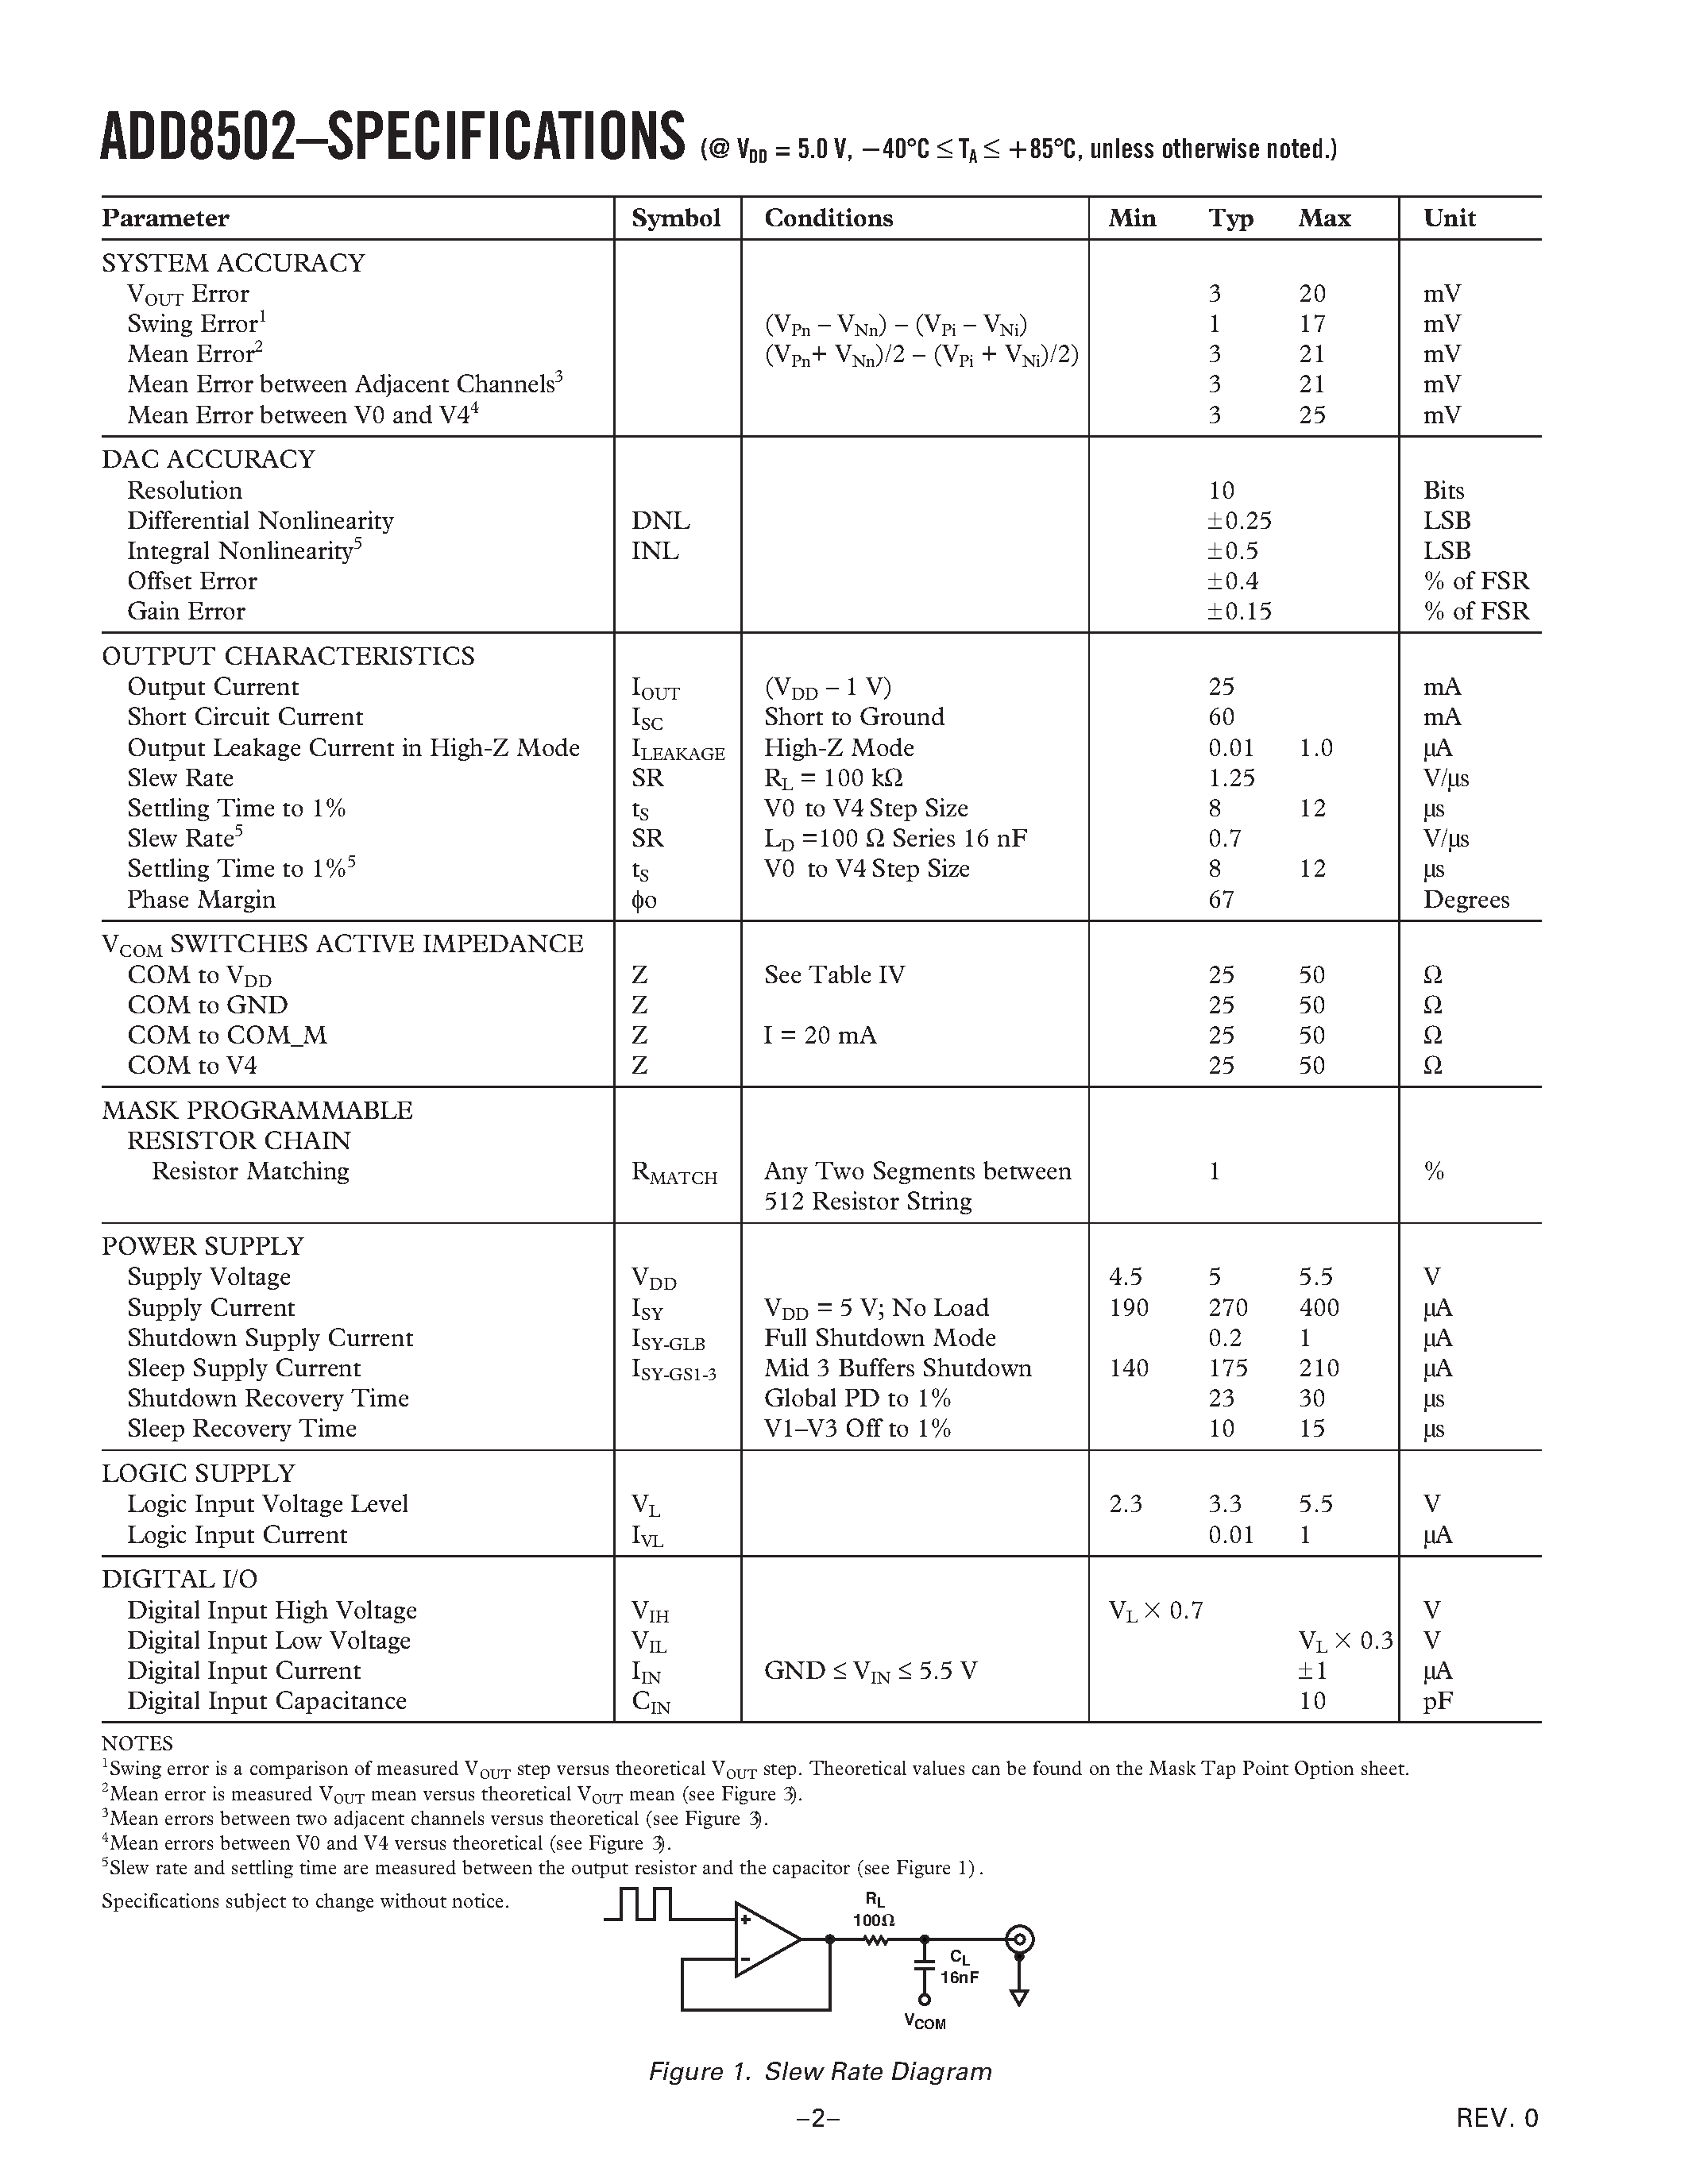 Datasheet ADD8502 - Integrated LCD Grayscale Generator page 2